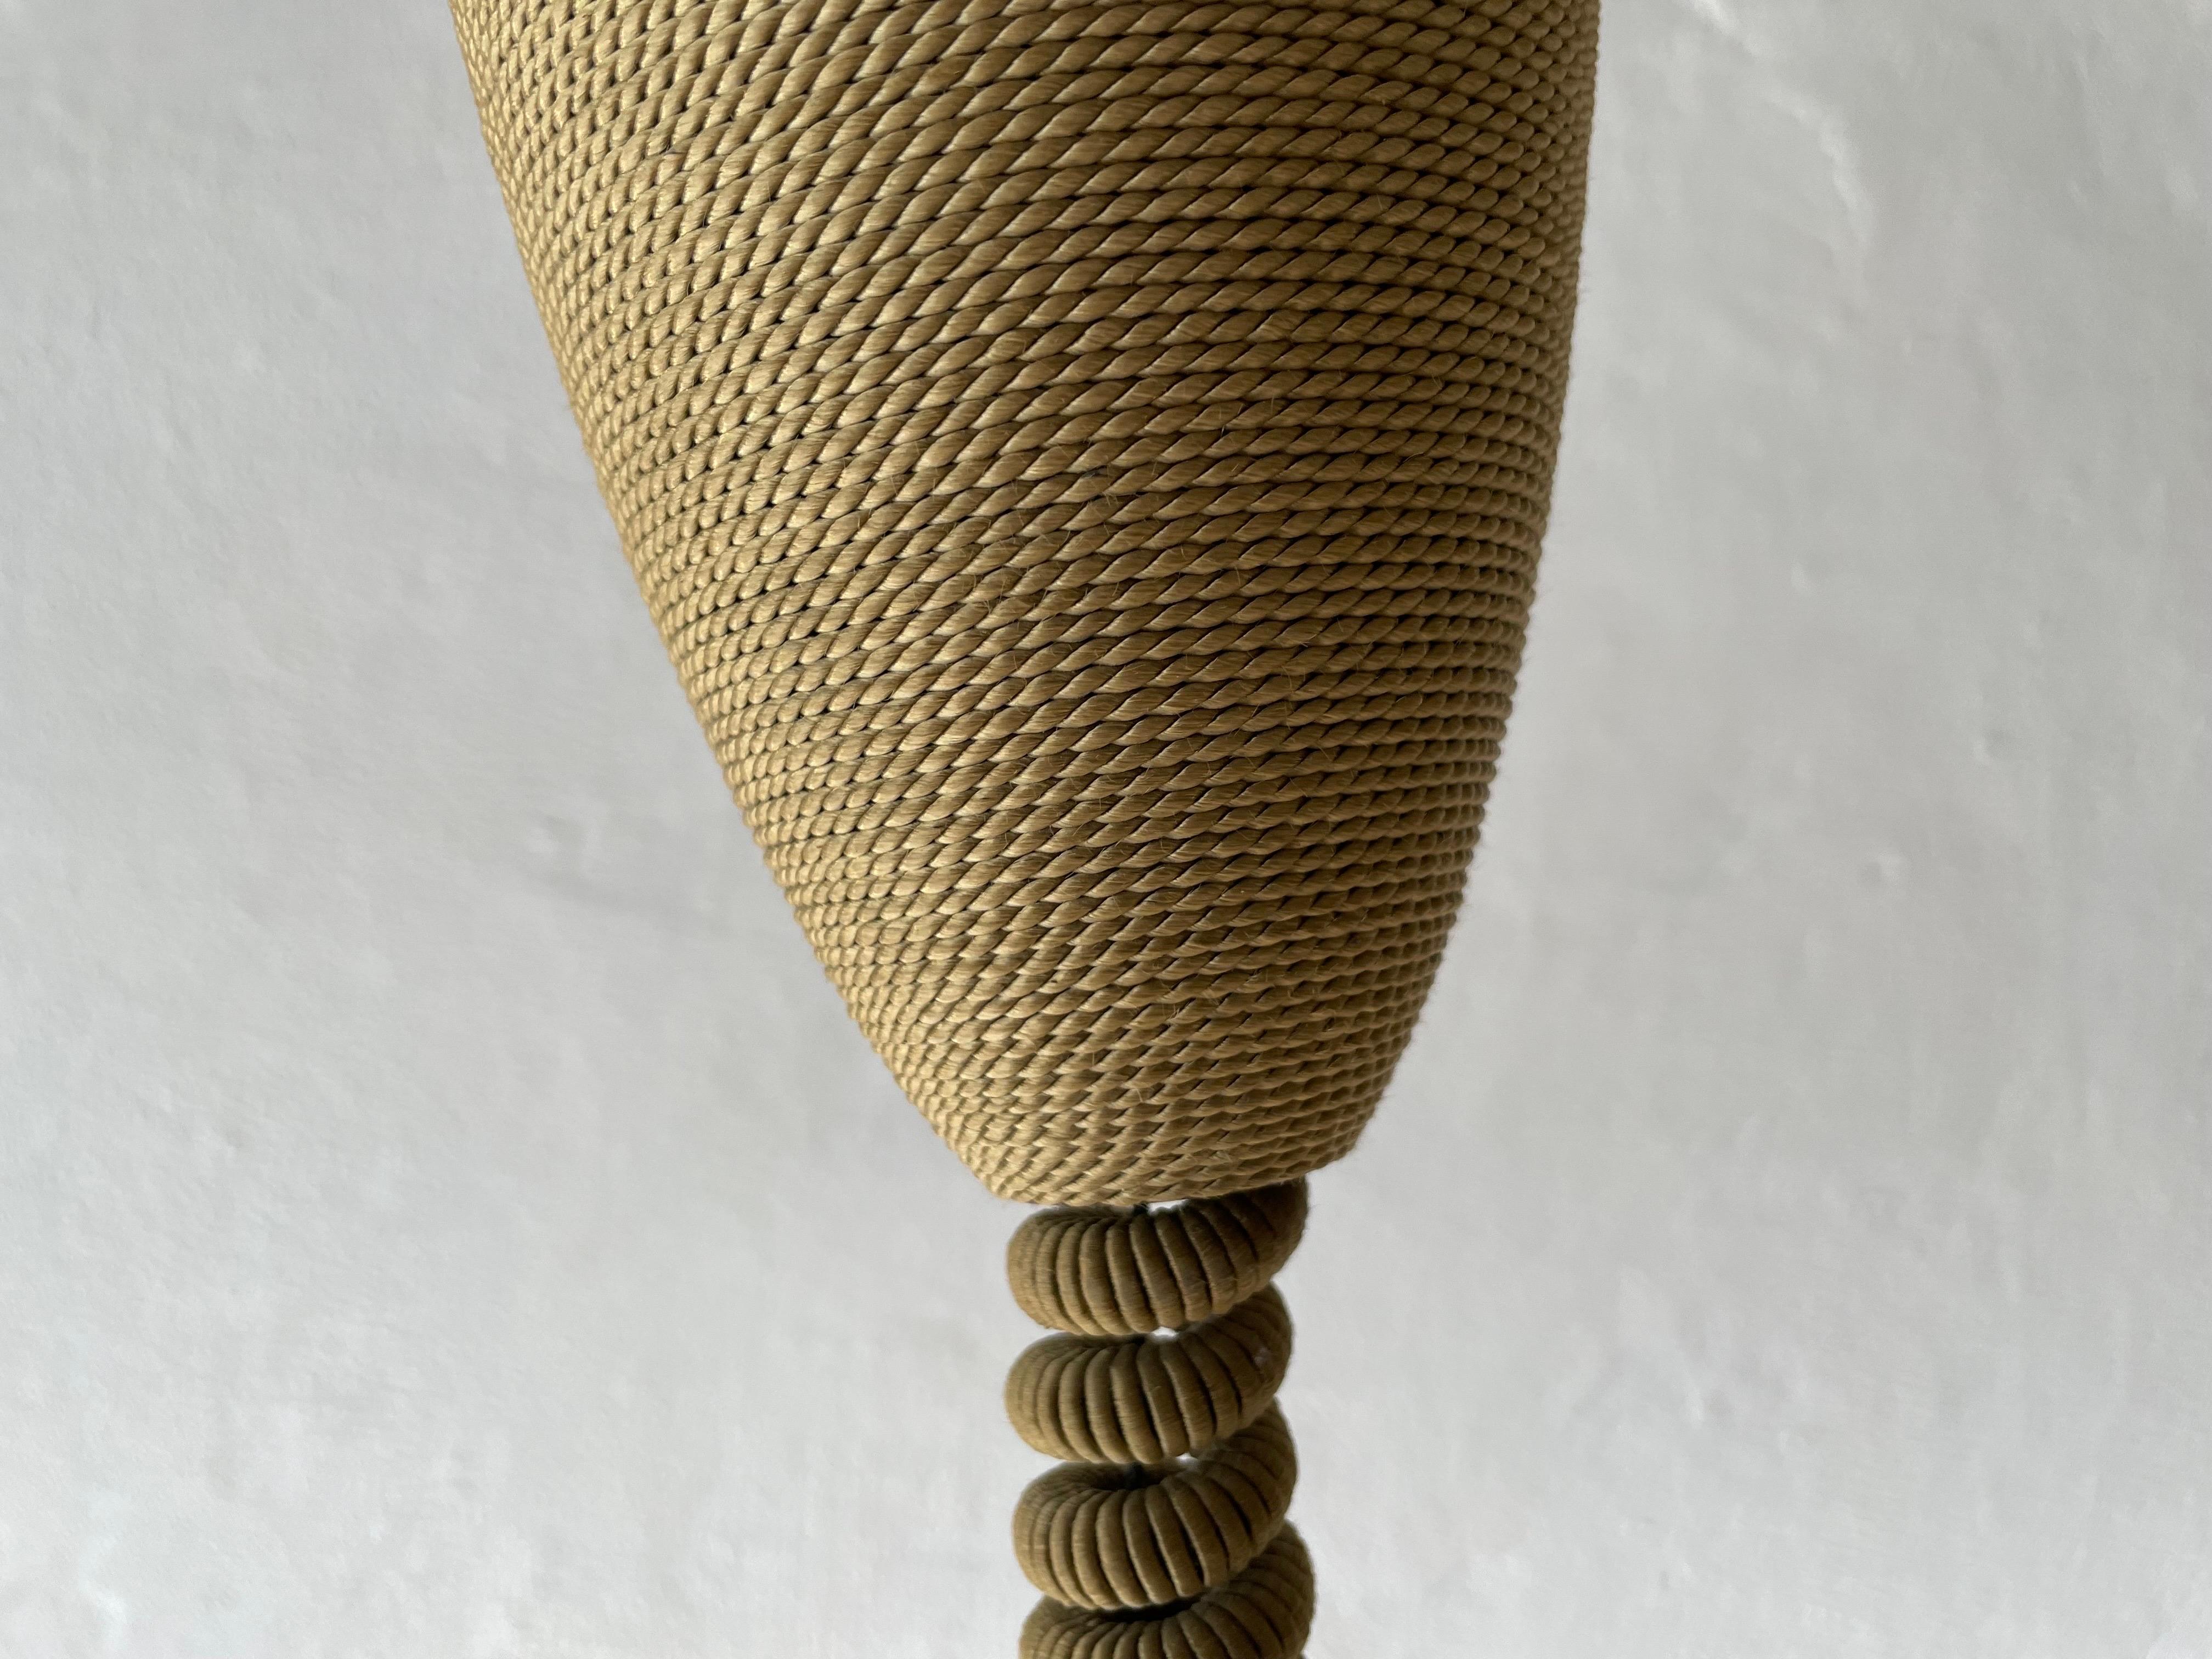 Triple Spot Shade Brass Pendant Lamp by Hillebrand, 1970s, Germany For Sale 14